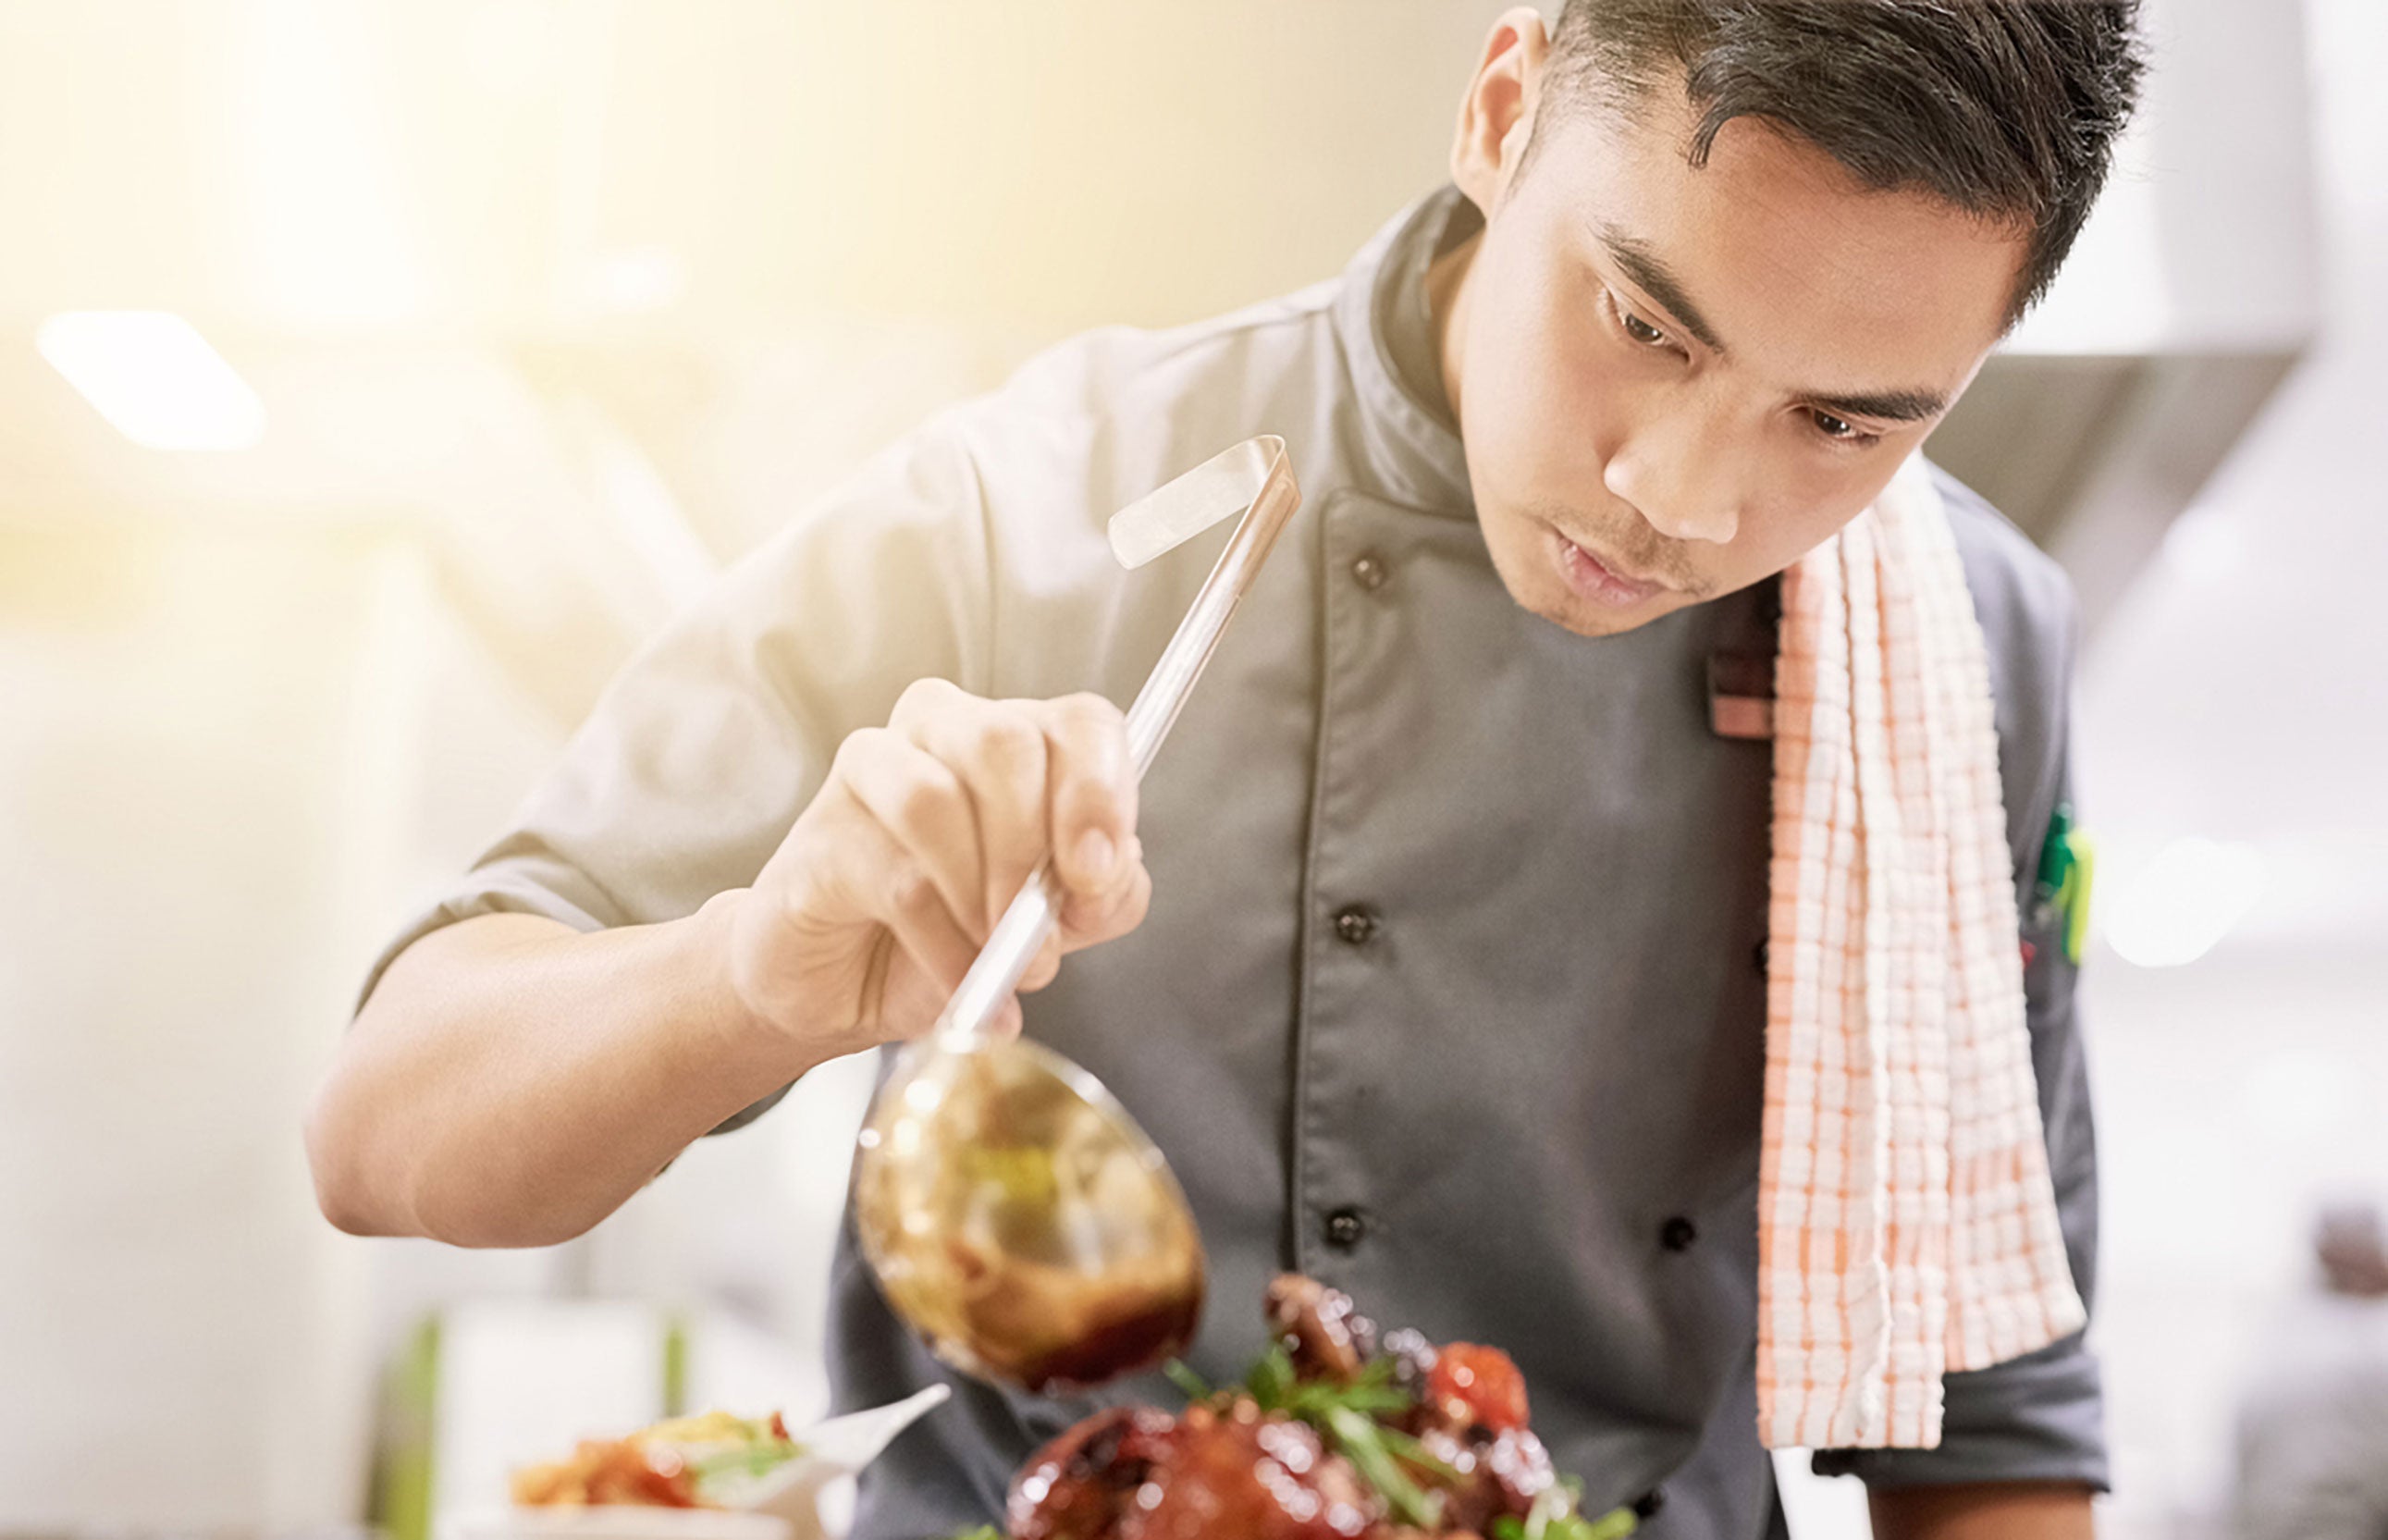 Gourmet chefs who love cooking elevated cuisine at home should consider these money-saving credit cards that offer great food-related rewards.